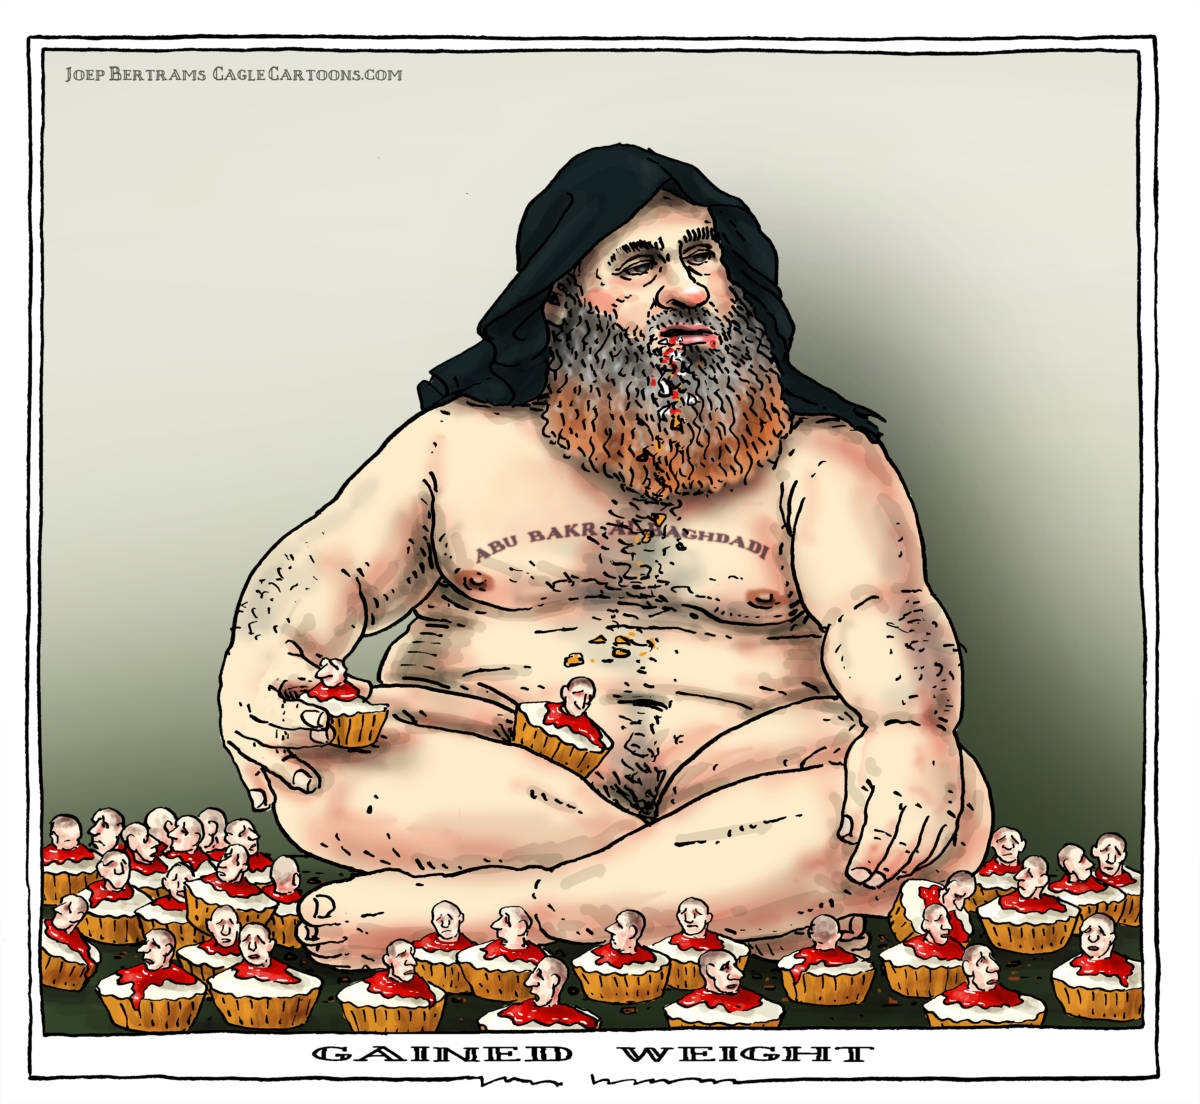 Gained weight, Joep Bertrams, southern Utah, Utah, St. George, The Independent, abu bakr al baghdadi, is, terror, decapitation, reappearance, threat, weight, obese,